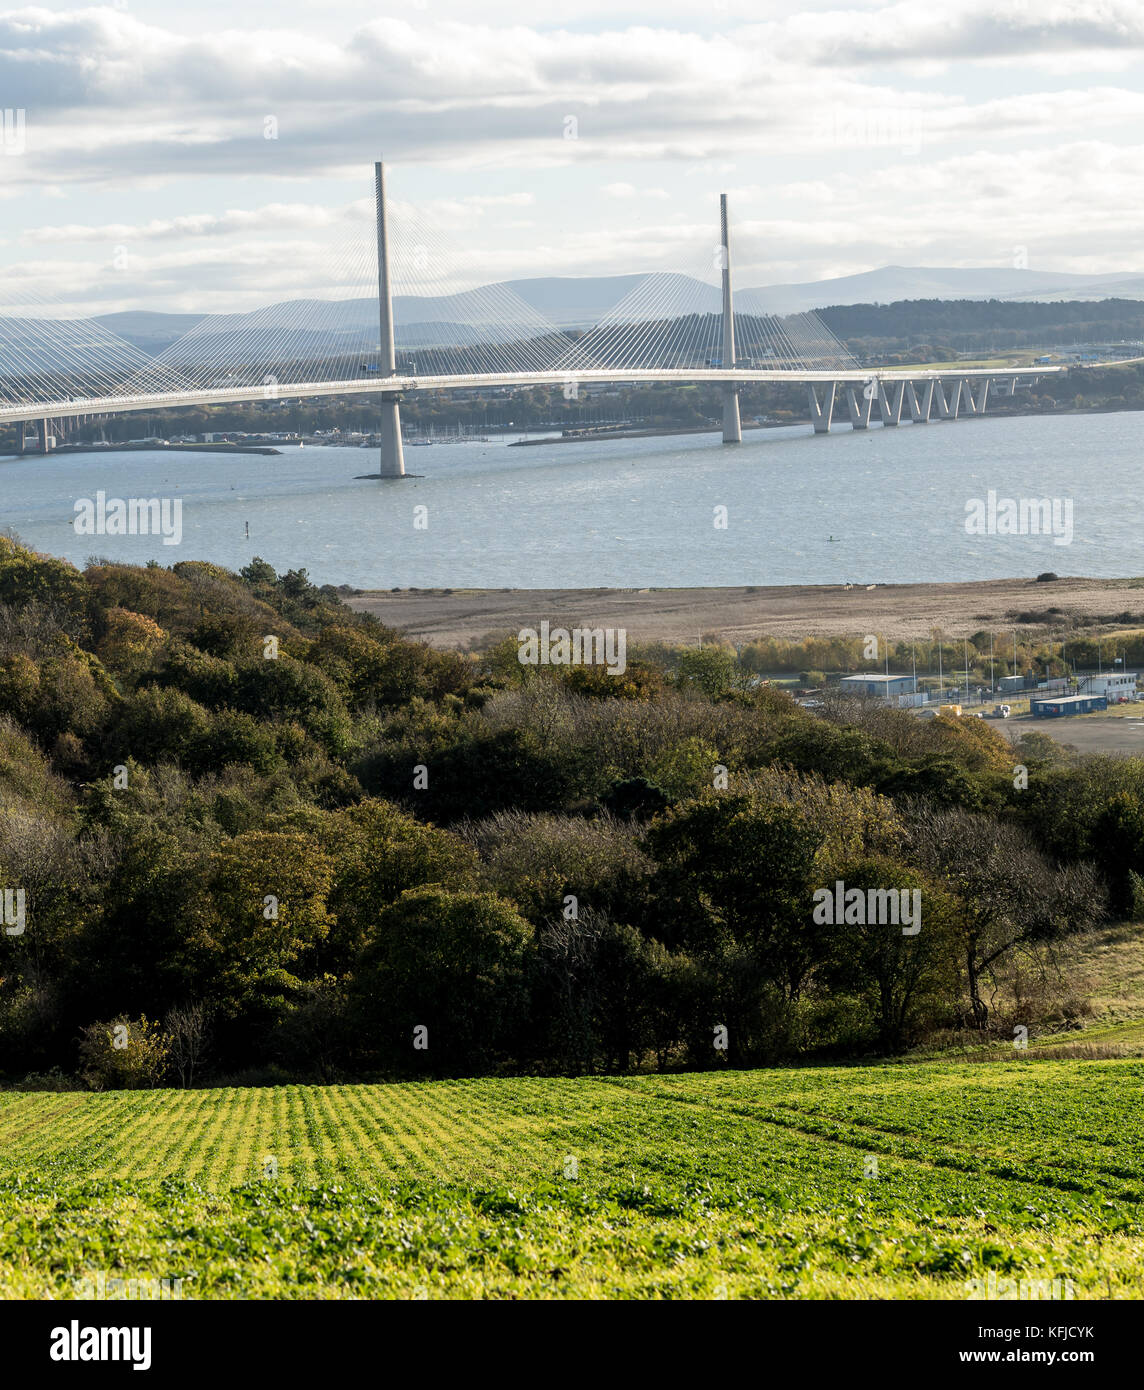 Rosyth Scotland, view of the new Queensferry crossing, a 2.7km road bridge between Edinburgh and Fife. the longest three-tower, cable-stayed bridge in Stock Photo